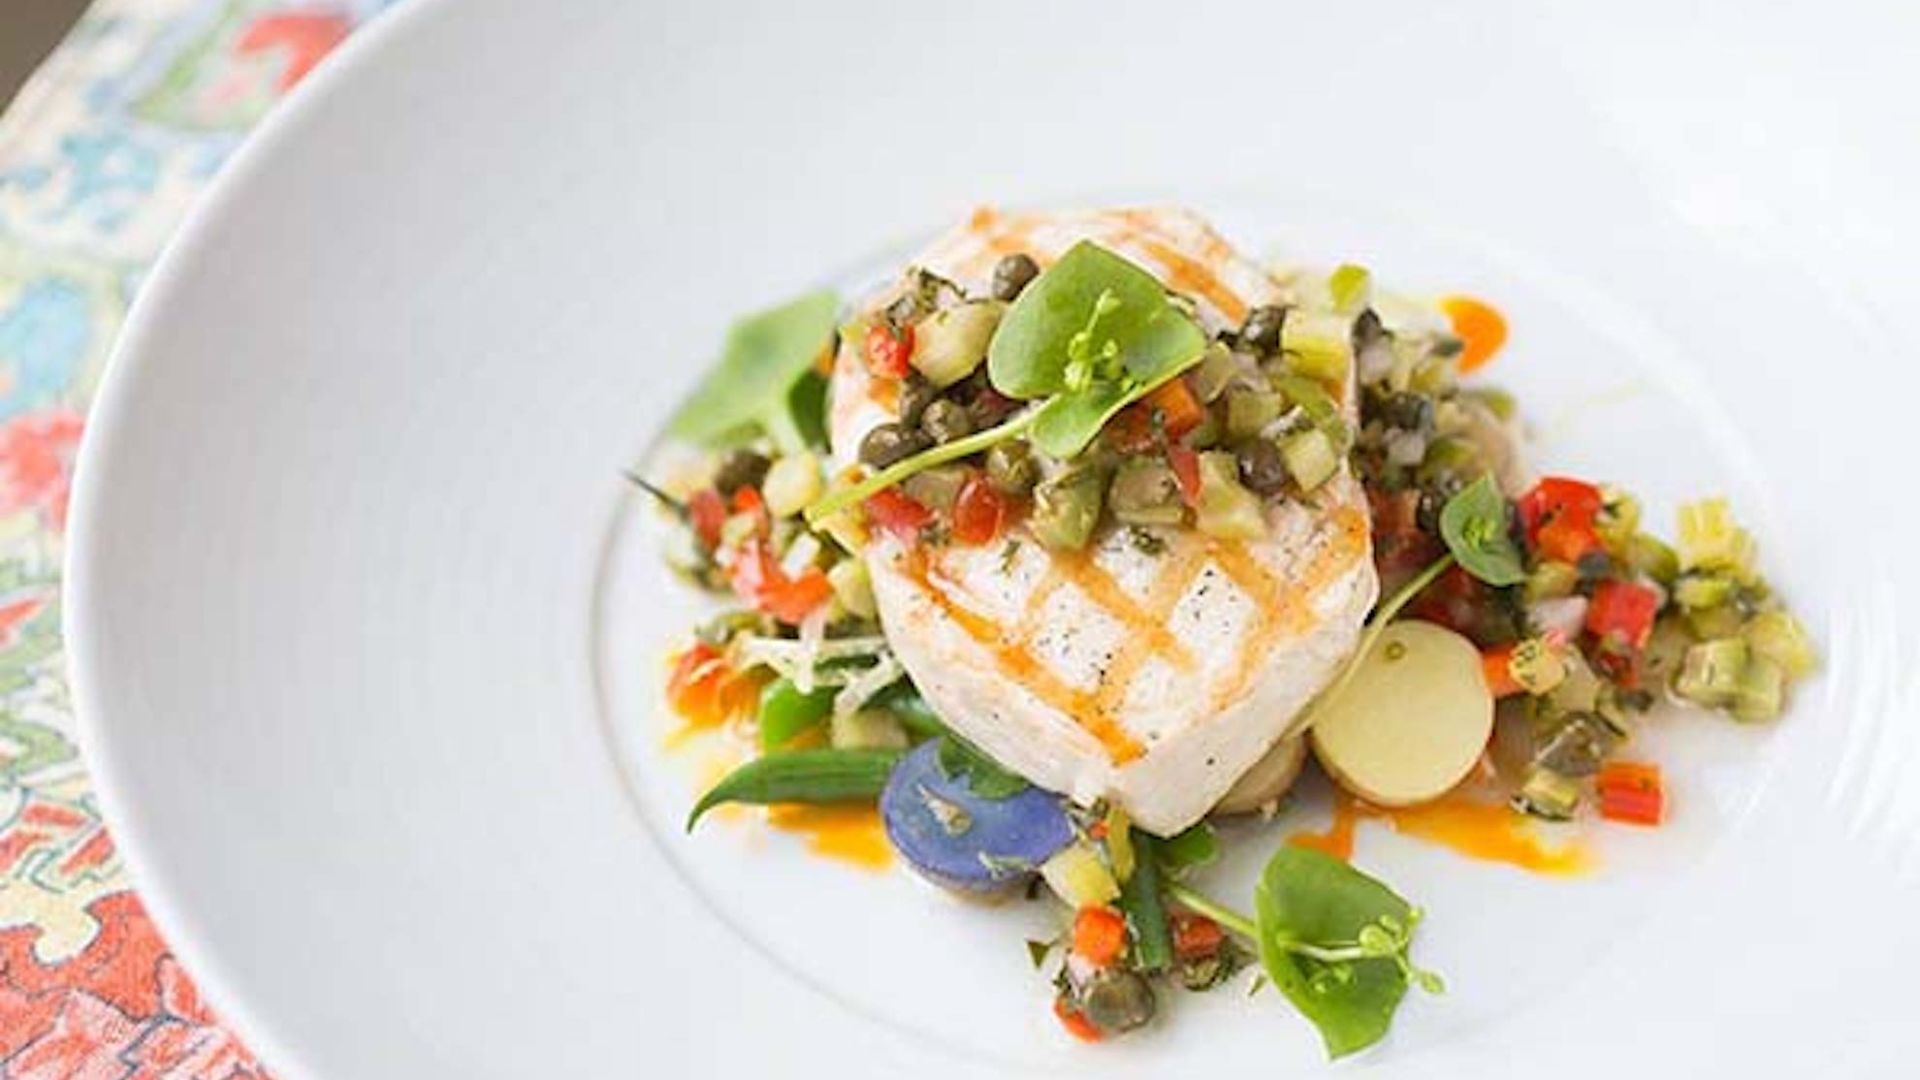 Grilled Swordfish Nicoise on a White Plate on a colorful placemat